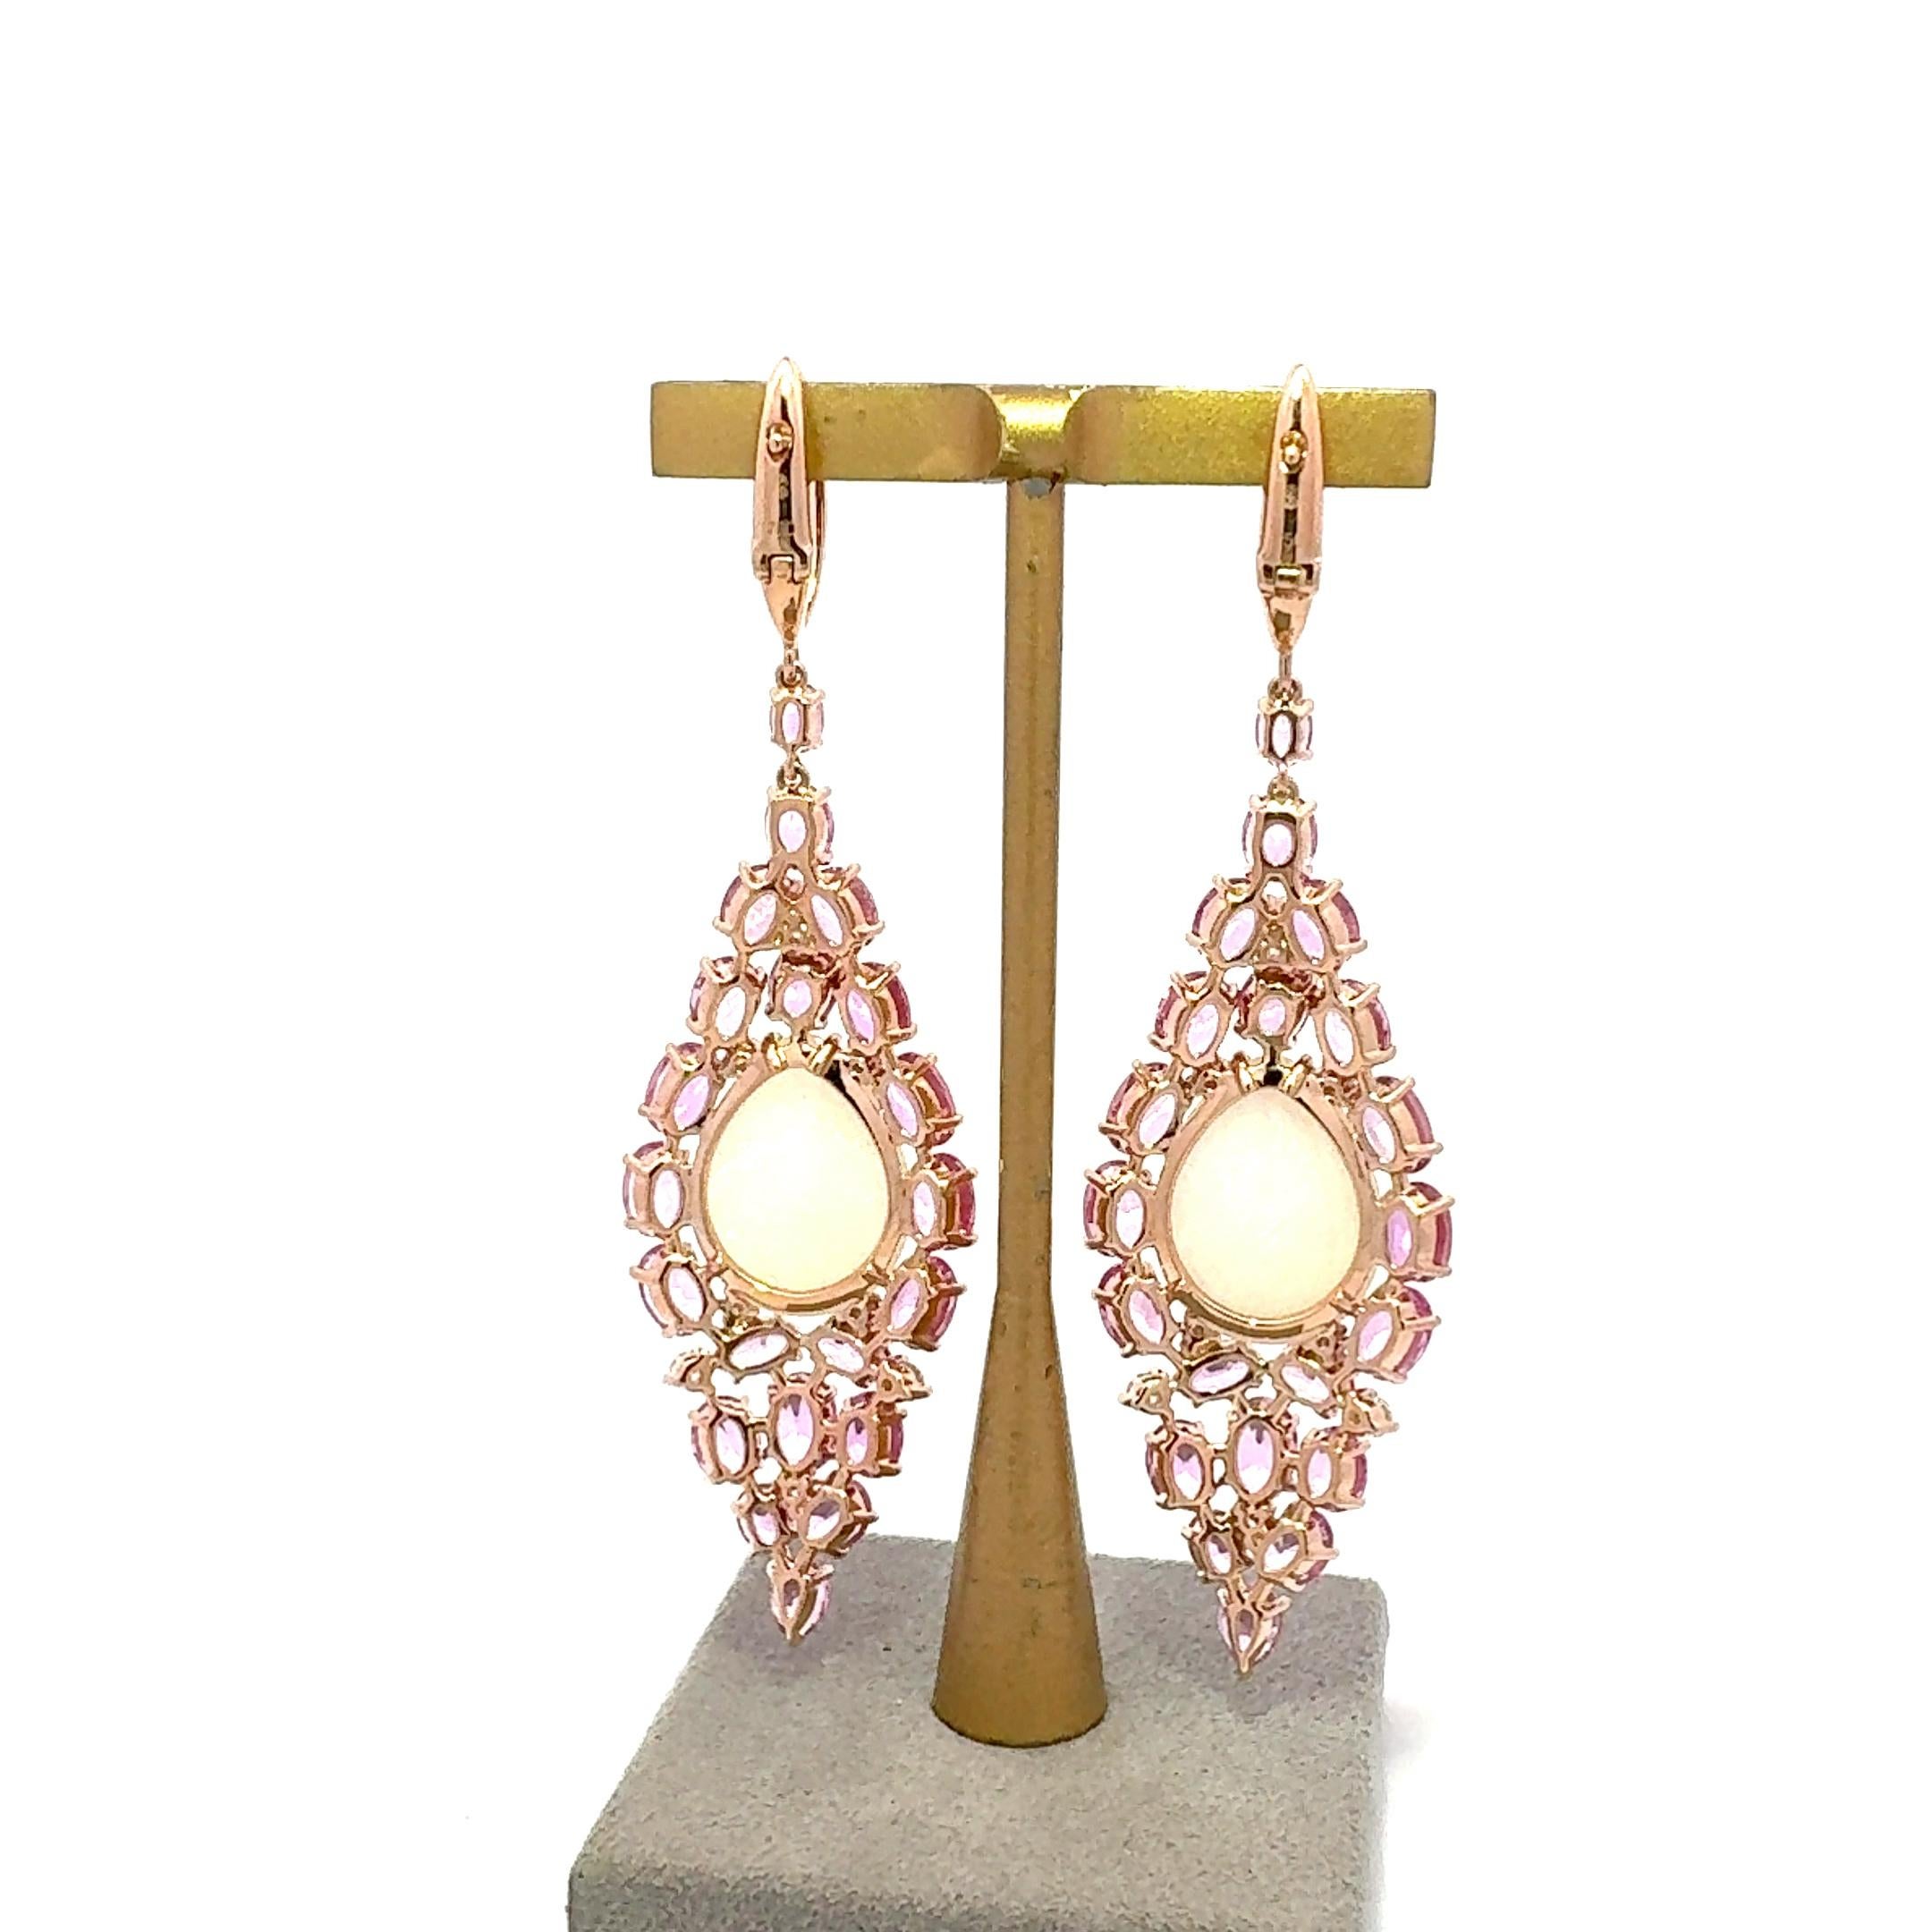 Earrings

Yellow 18K Gold

Diamonds 0.63 ct
Pink Sapphires 14.74 ct
White Opal 9.43 ct

Weight 12 grams

With a heritage of ancient fine Swiss jewelry traditions, NATKINA is a Geneva based jewellery brand, which creates modern jewellery masterpieces